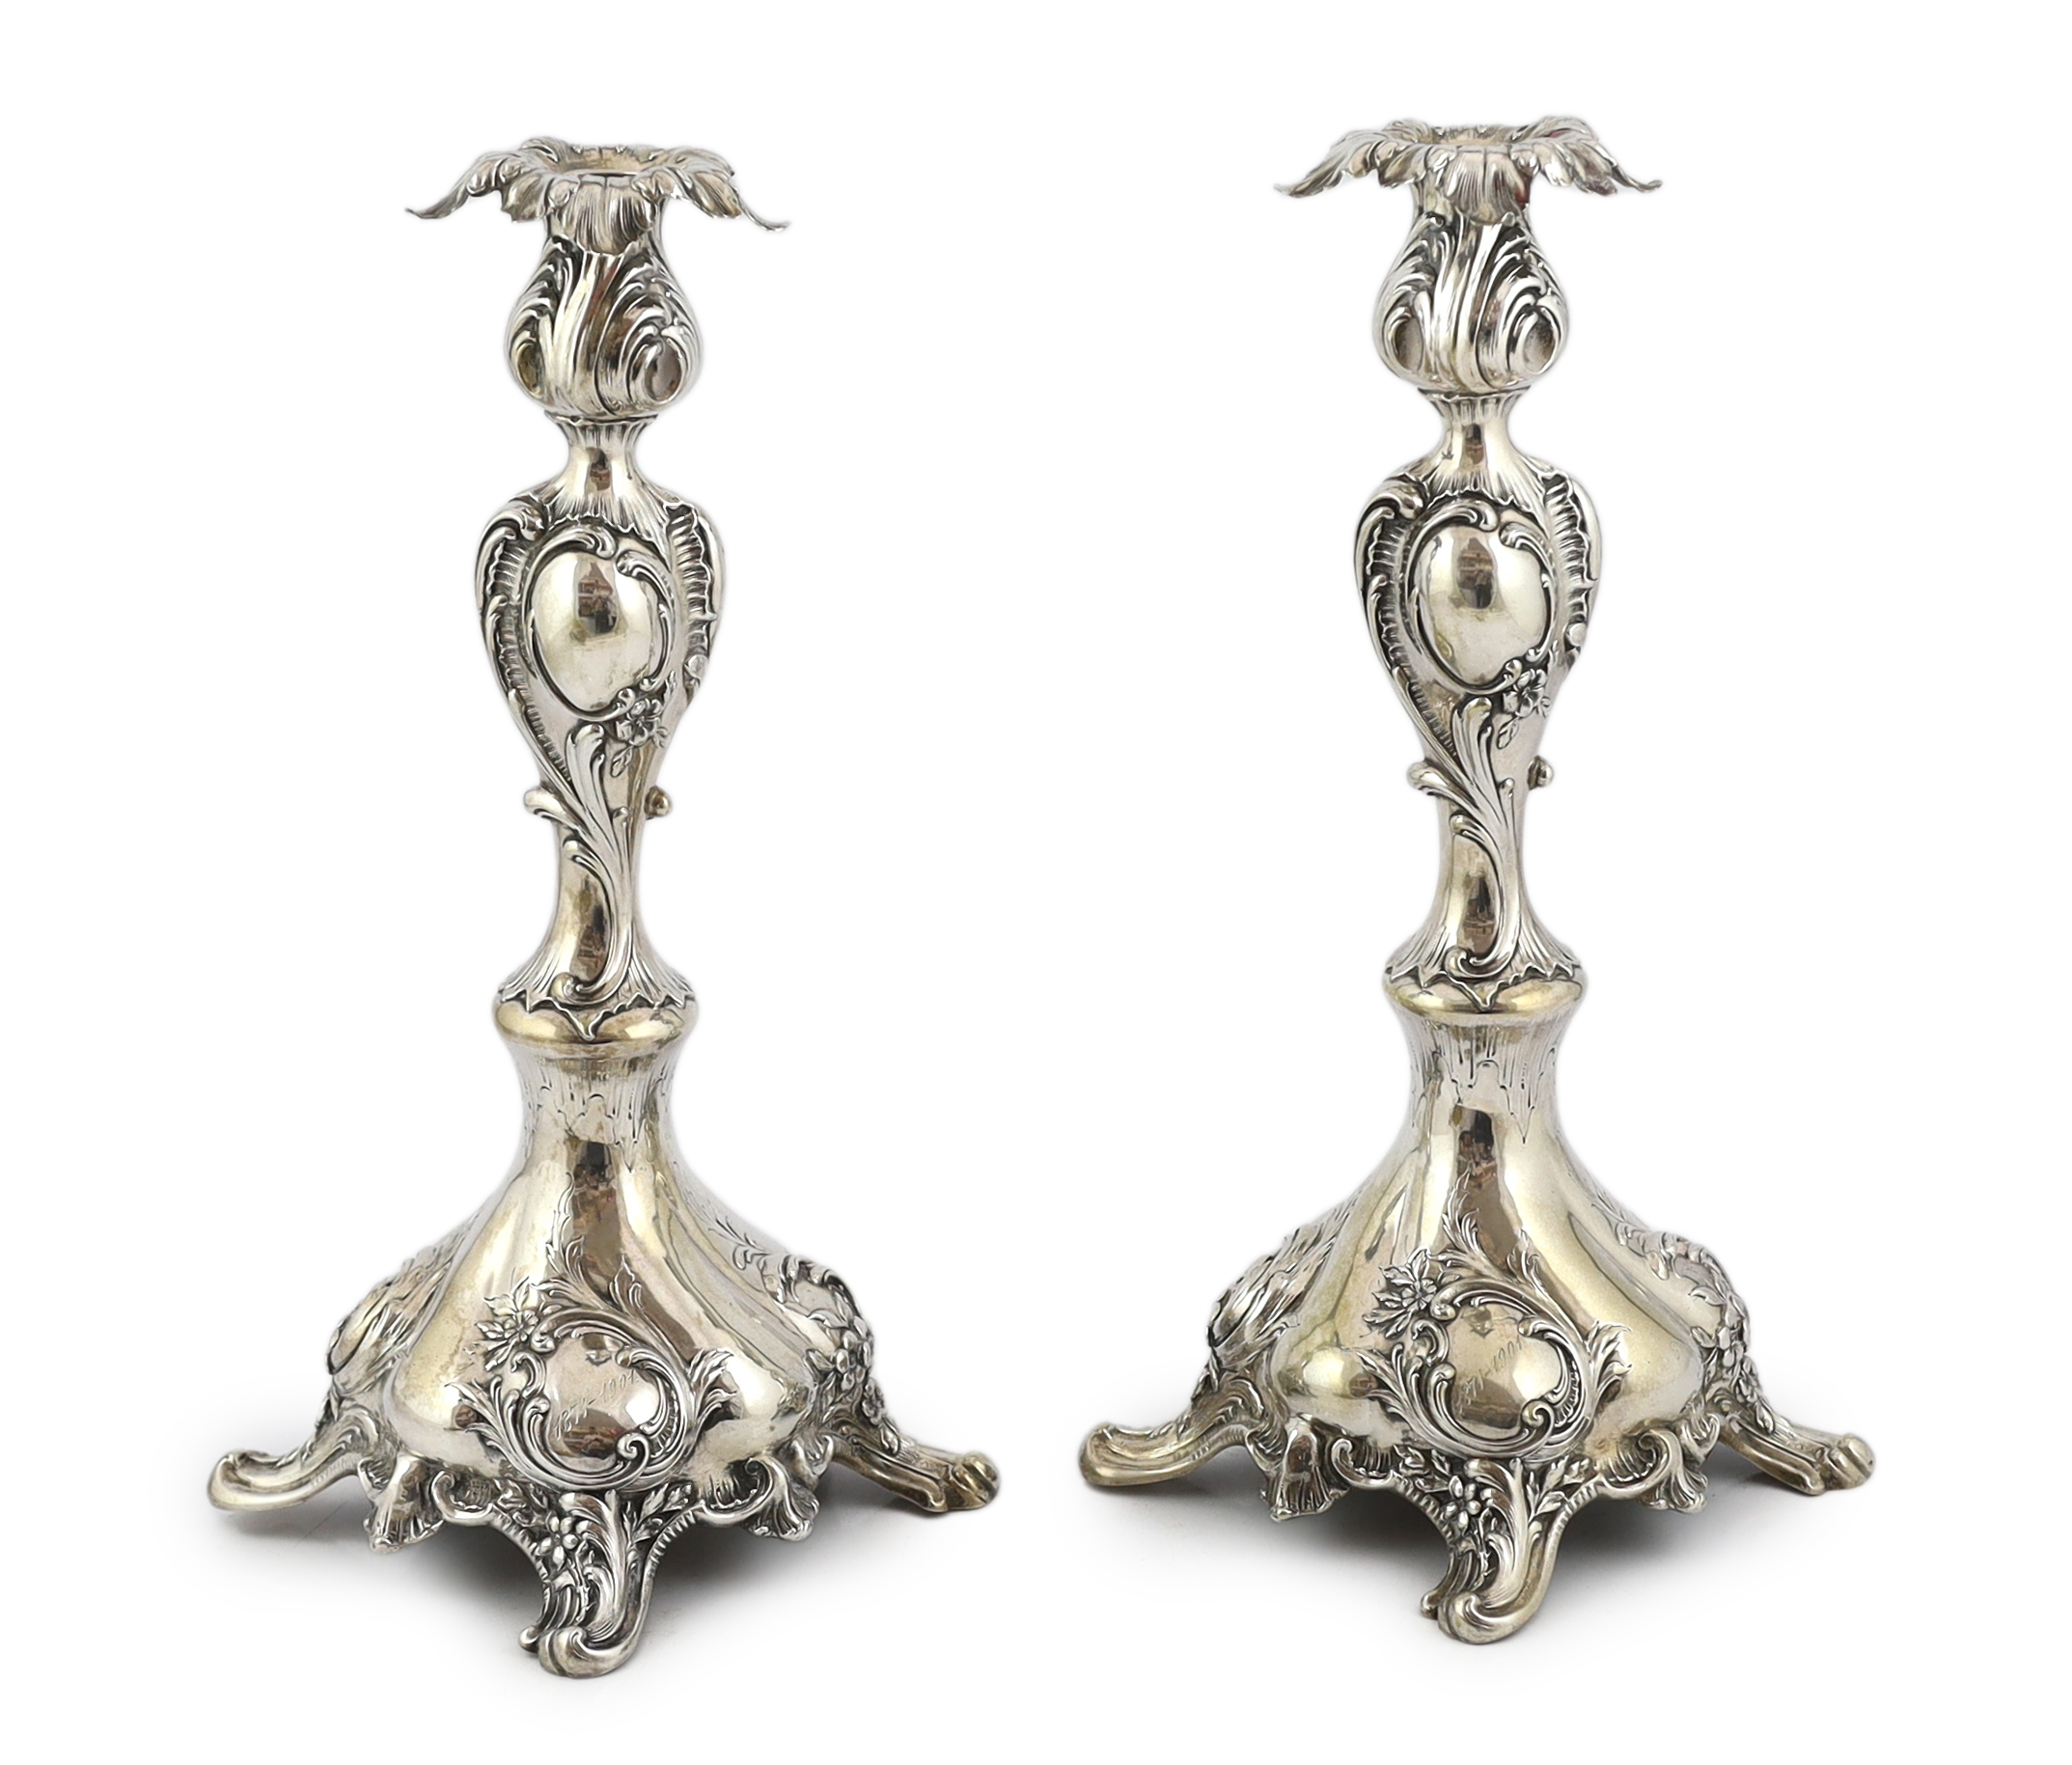 A pair of early 20th century German 800 standard silver candlesticks, by Schmedlin